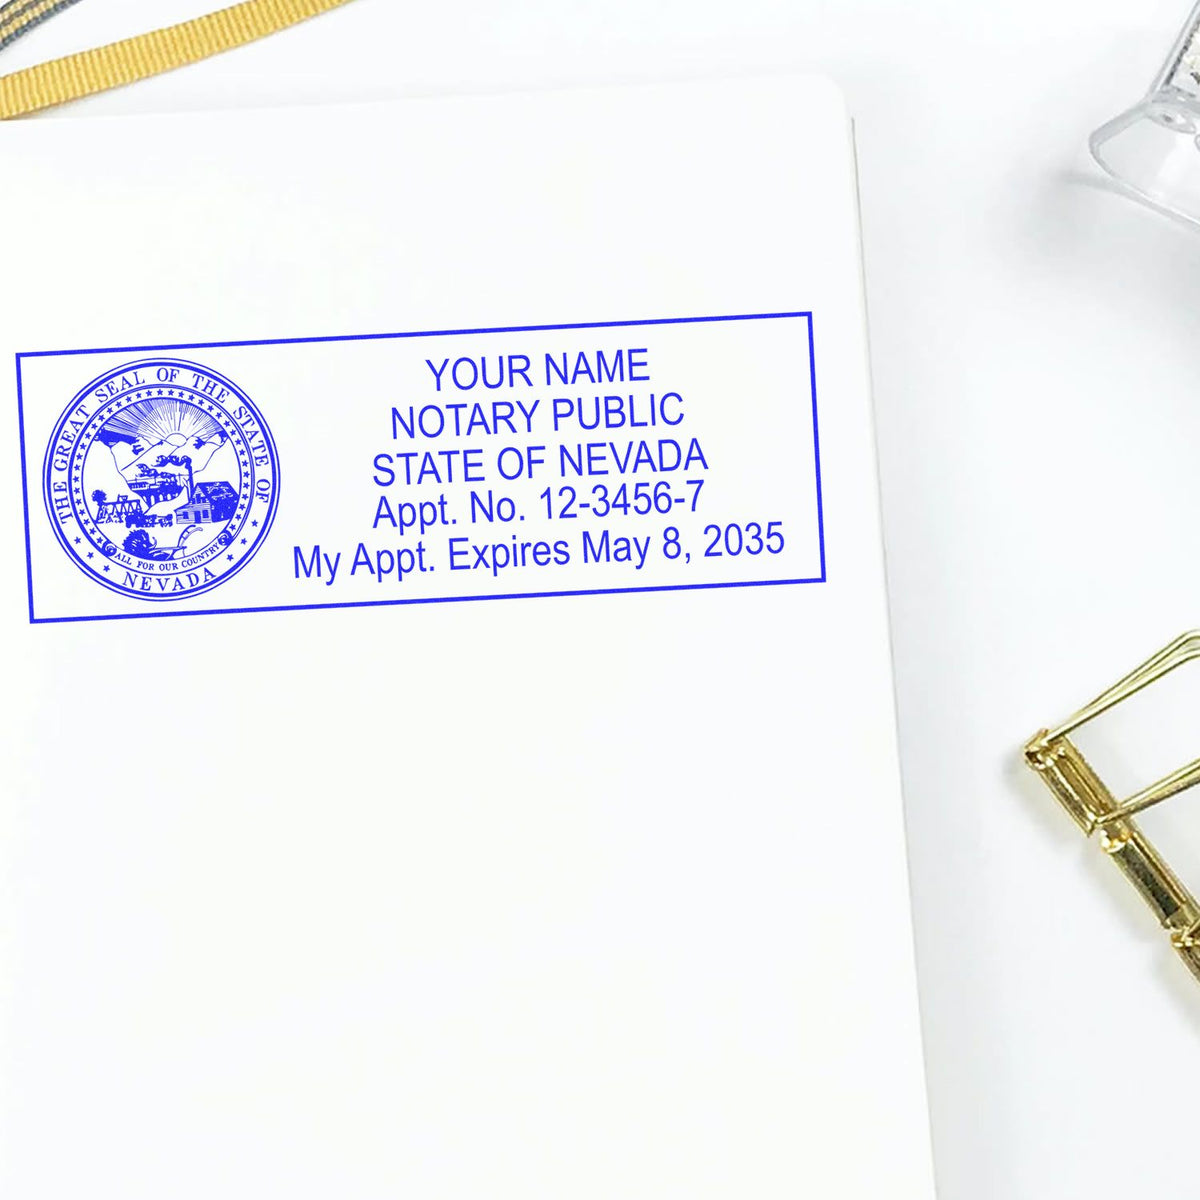 This paper is stamped with a sample imprint of the Slim Pre-Inked State Seal Notary Stamp for Nevada, signifying its quality and reliability.